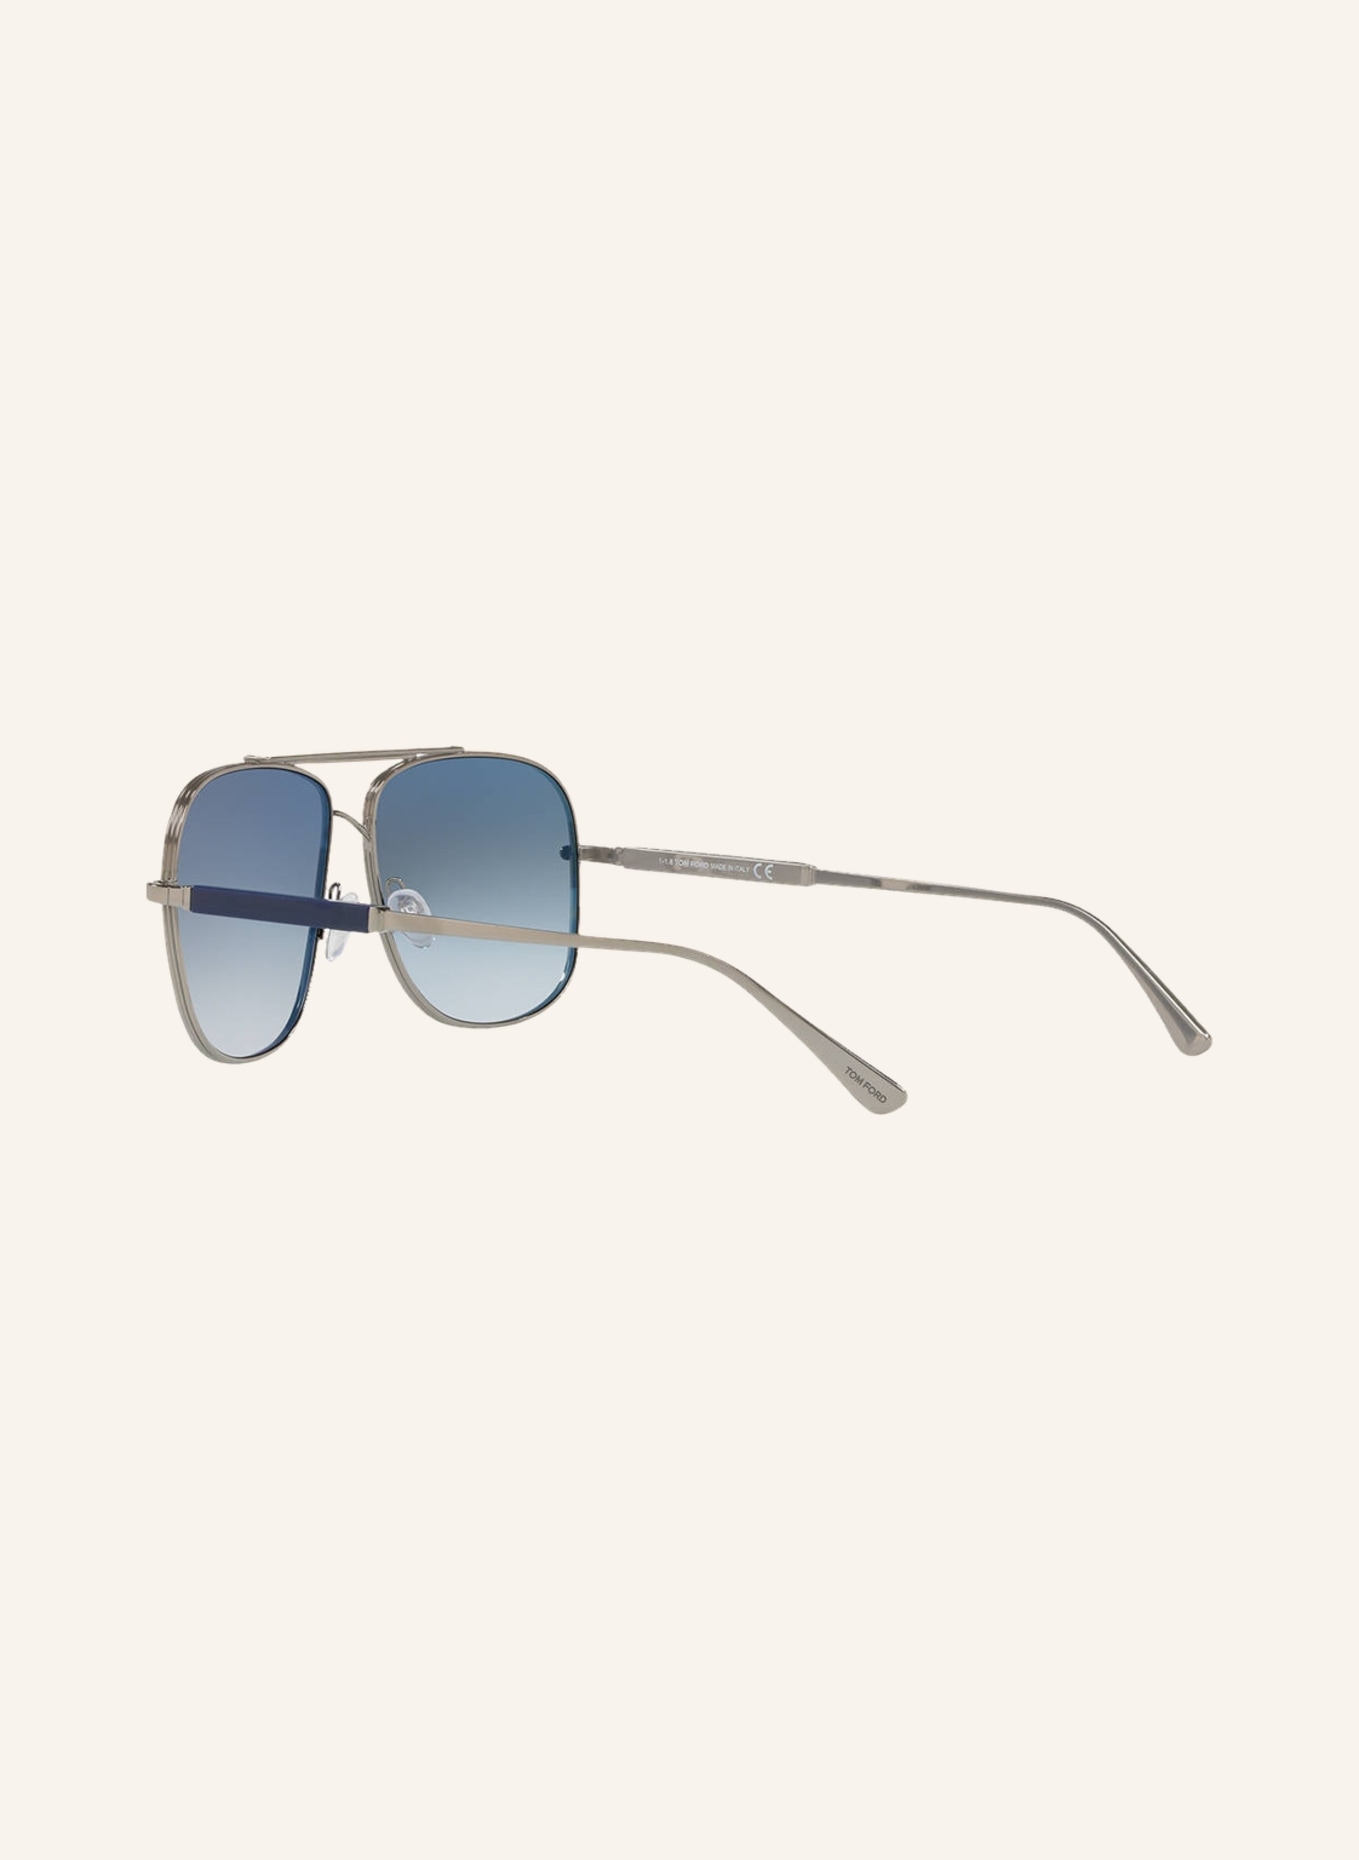 TOM FORD Sunglasses TR001025 JUDE, Color: 2880B2 - SILVER/BLUE GRADIENT (Image 4)